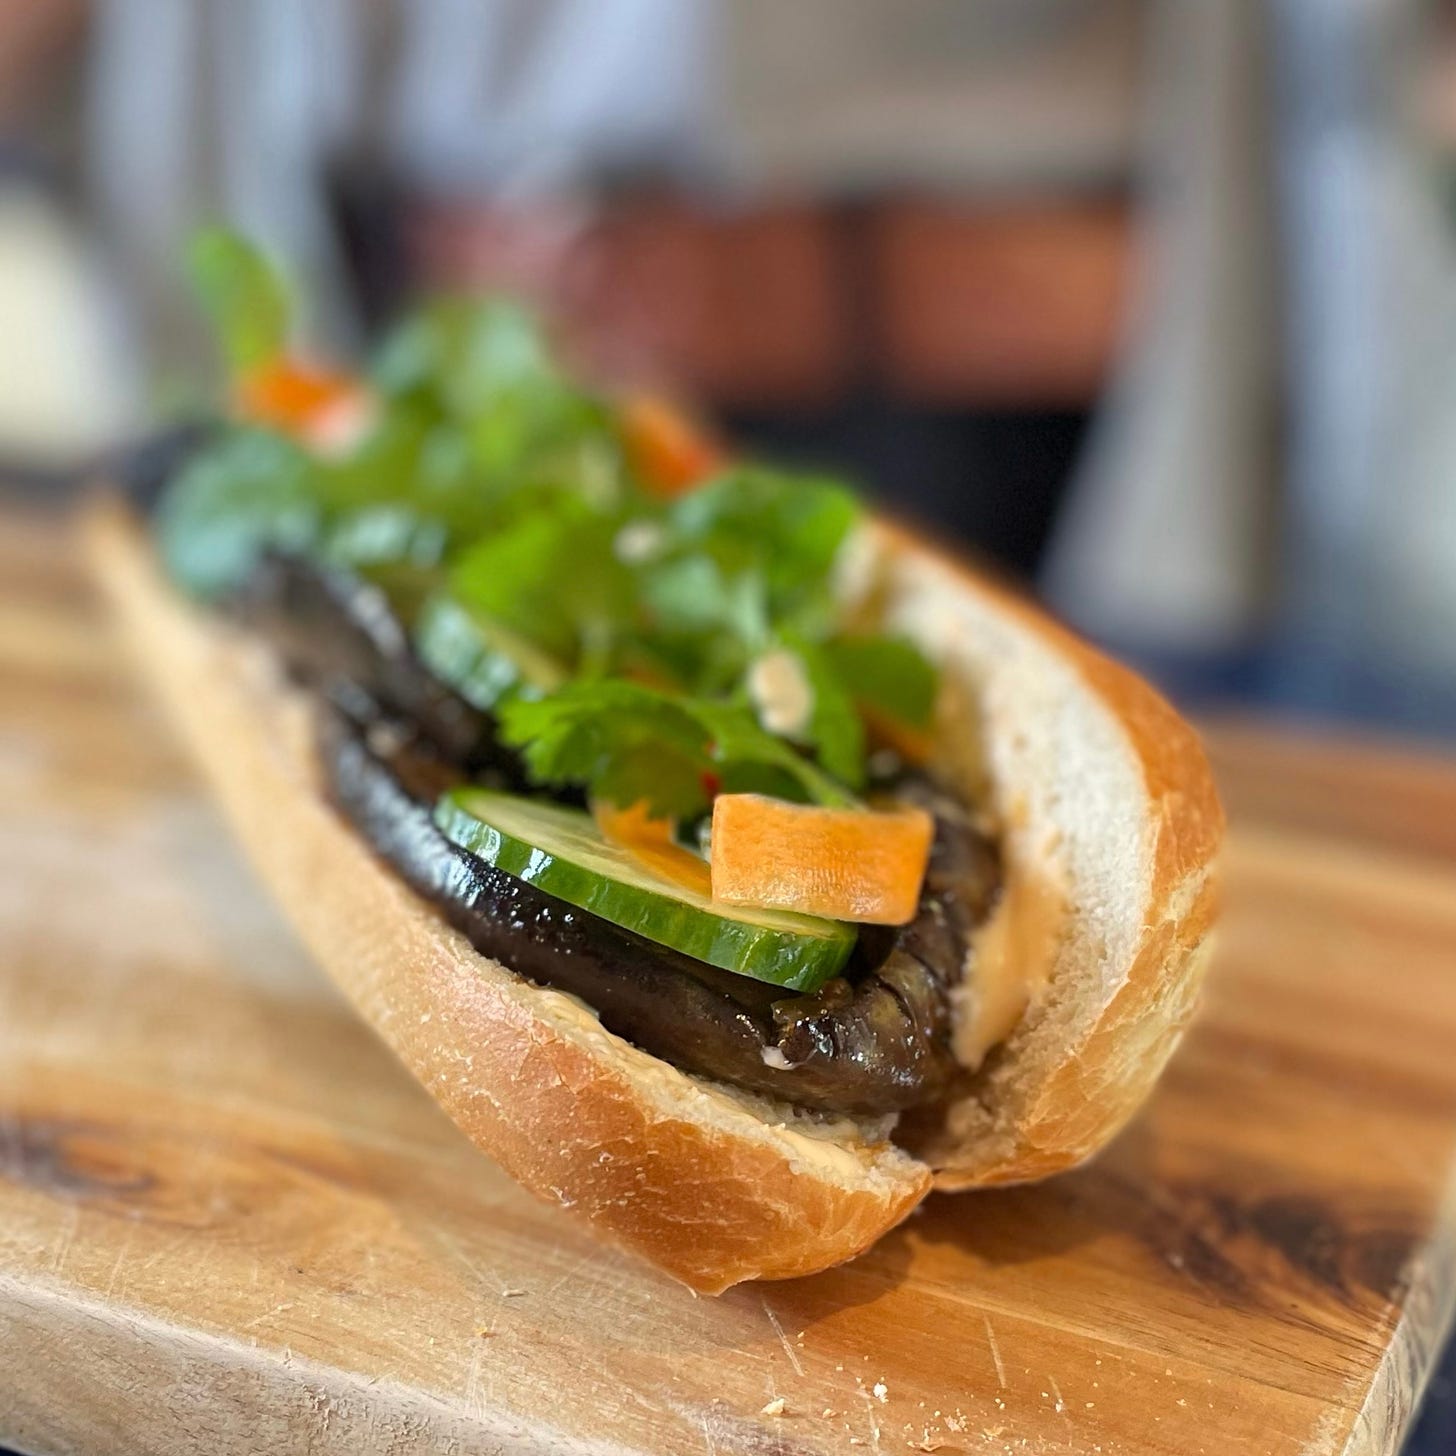 Open baguette filled with sliced aubergine, cucumber, carrot, and herbs